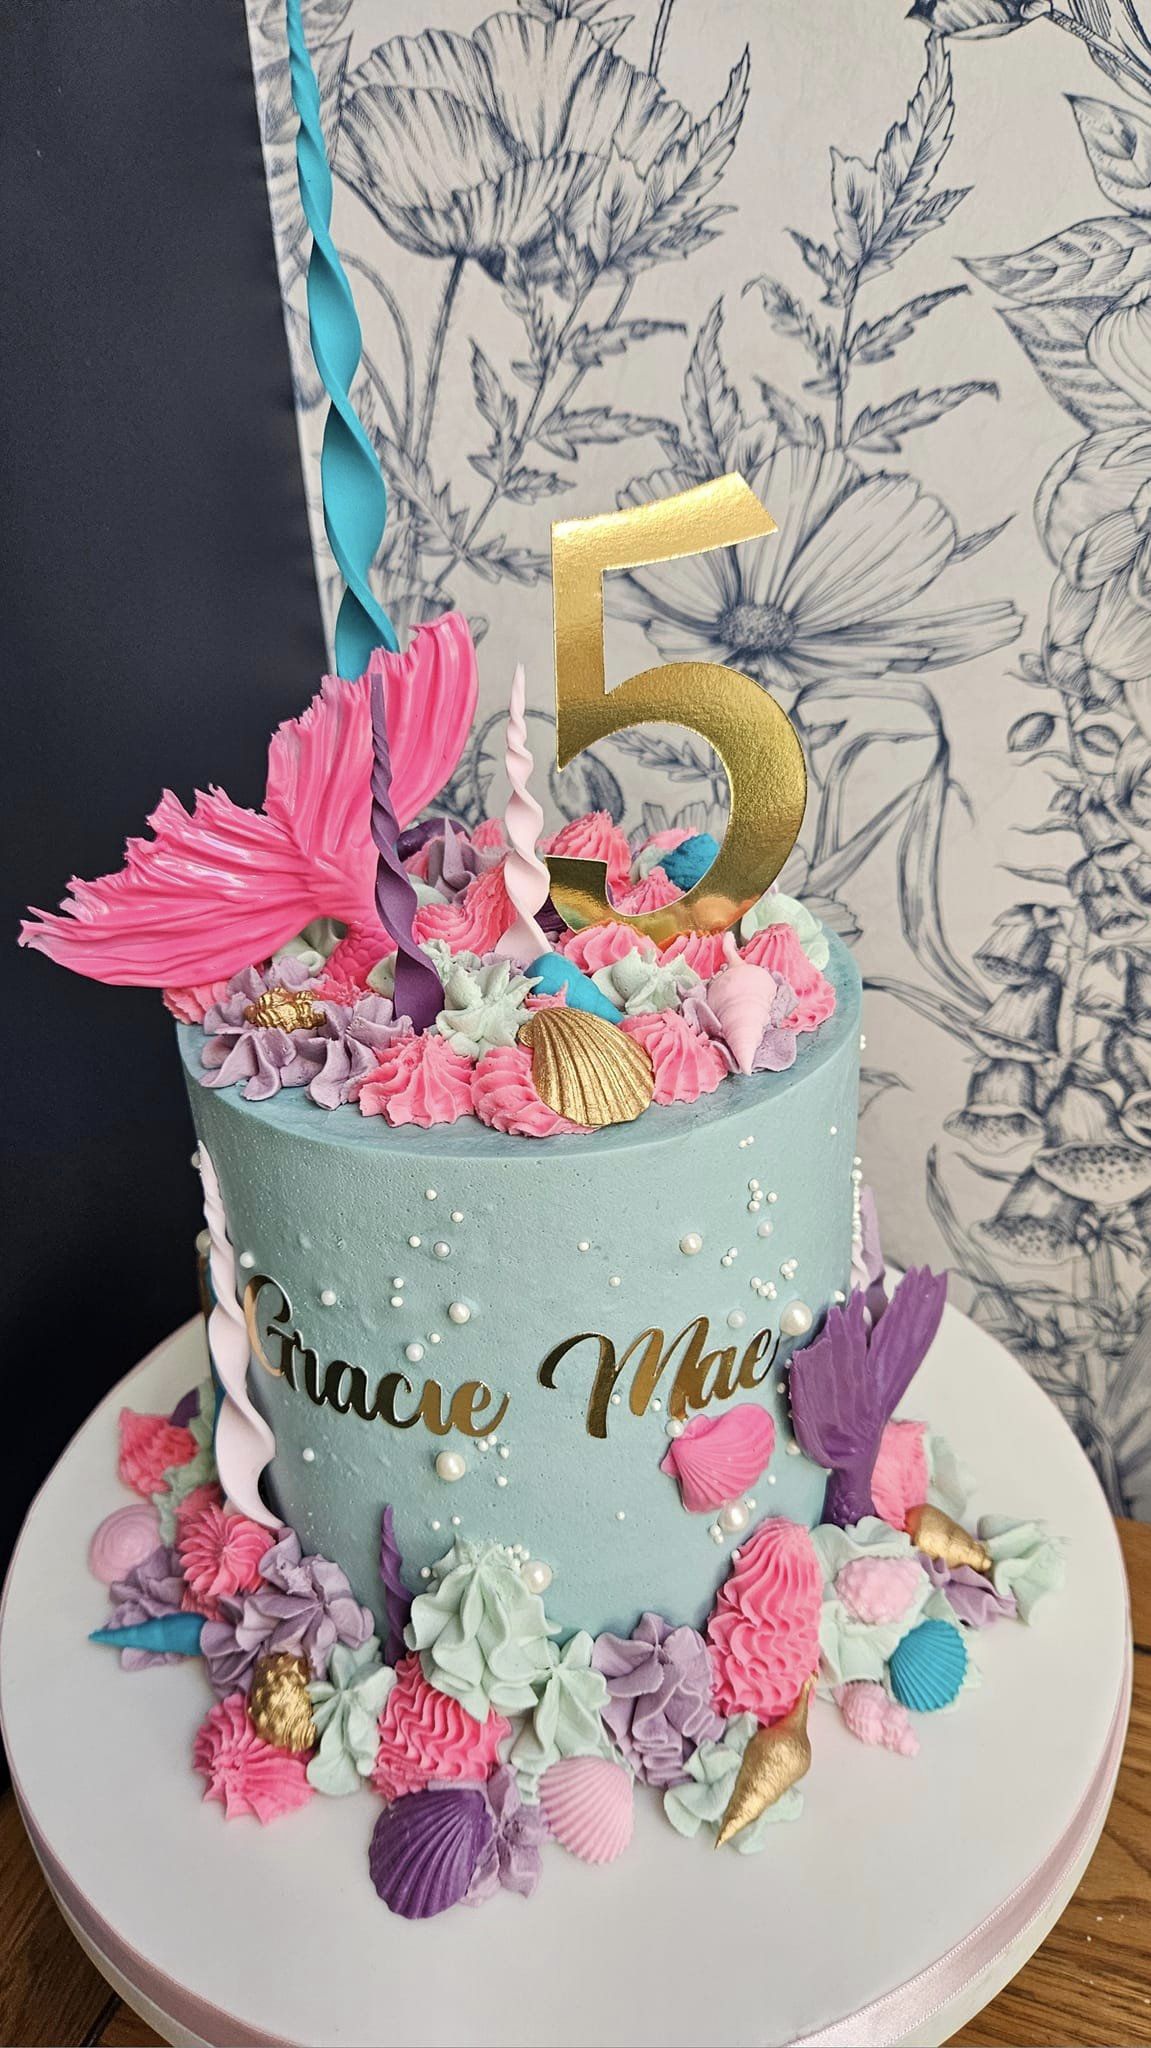 🧜🏻‍♀️🐚🎂 Explore a sea of creative cake ideas that will bring the magic of the ocean to your child’s special day.